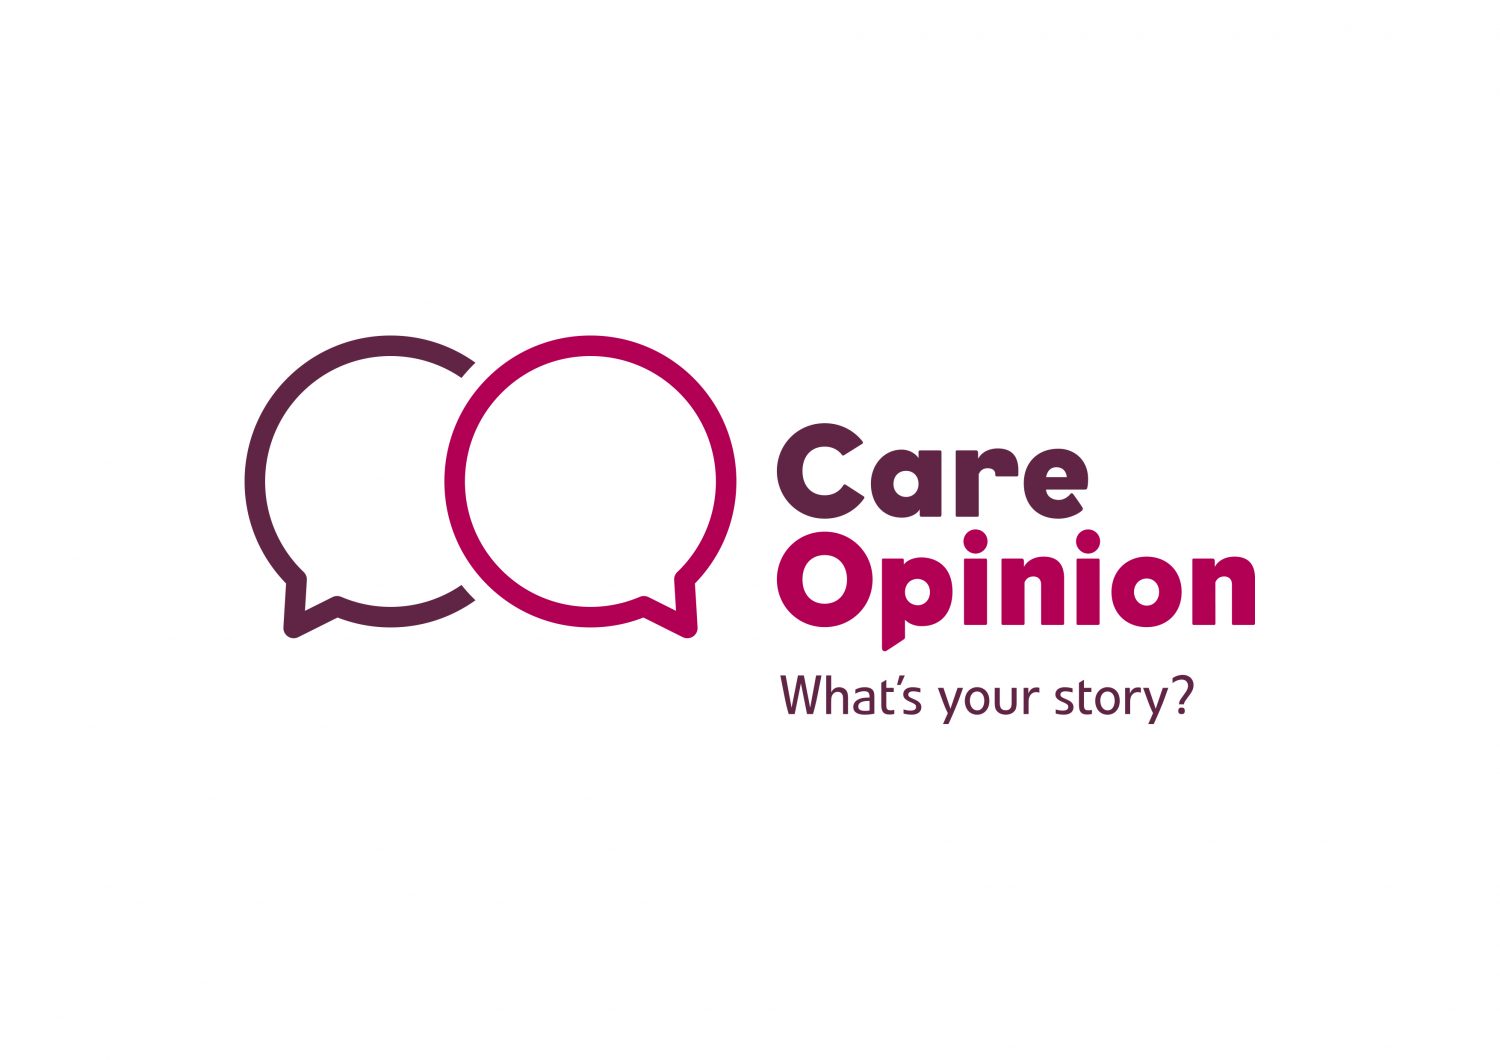 Developing a Care Opinion research community